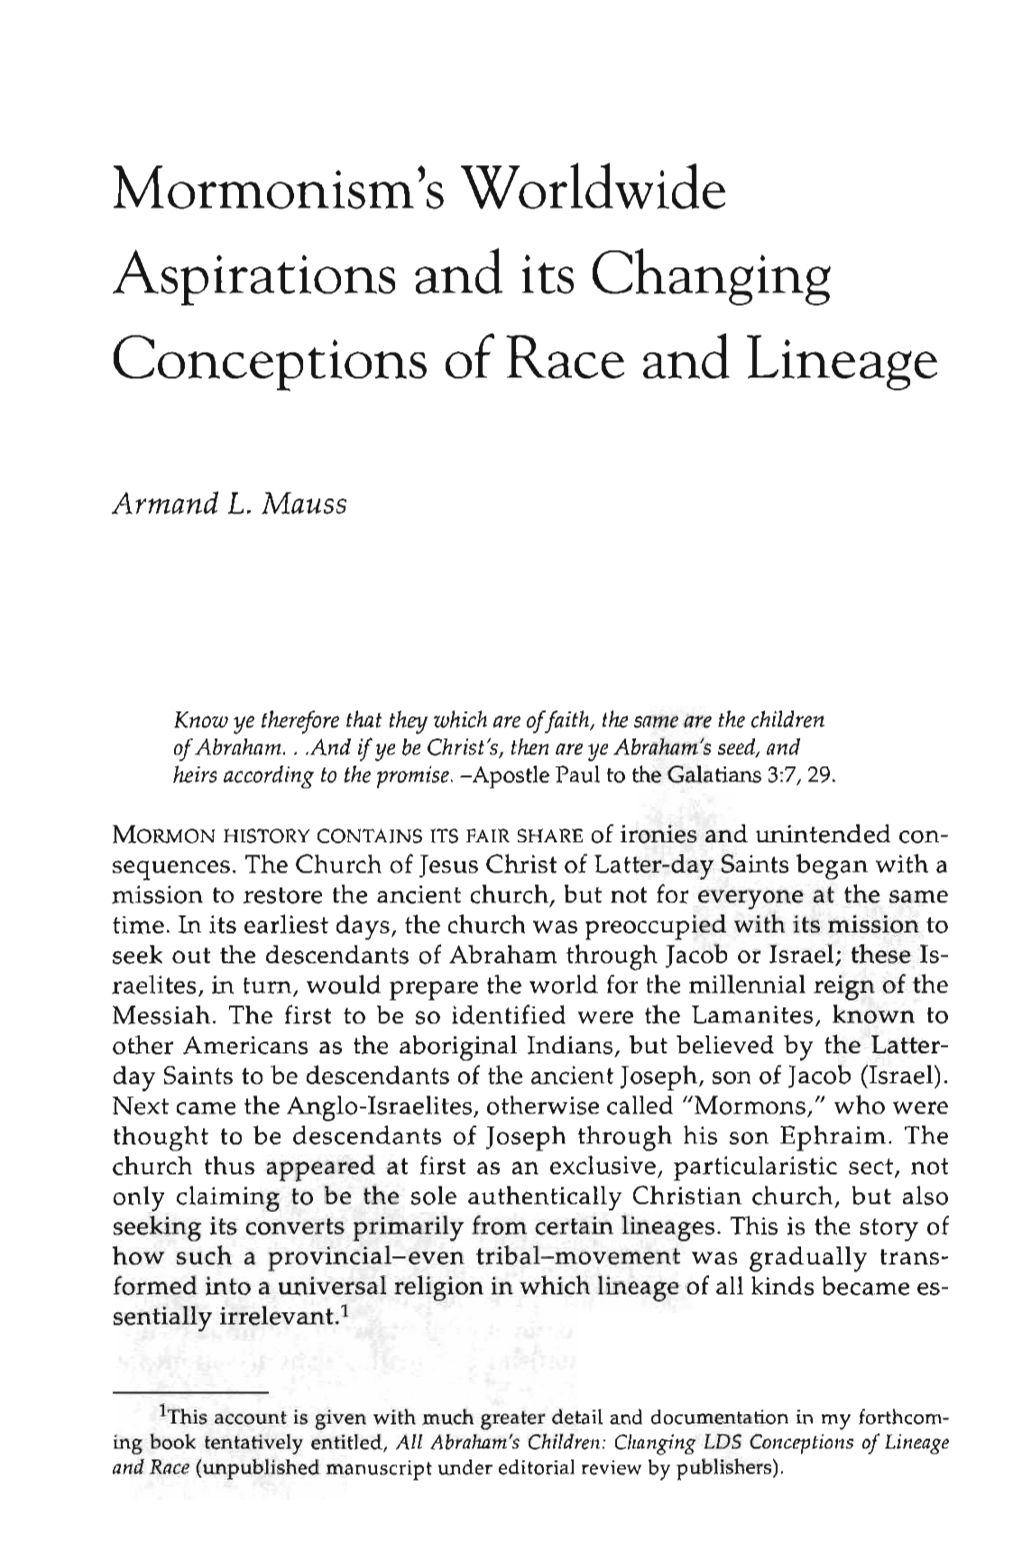 Mormonism's Worldwide Aspirations and Its Changing Conceptions of Race and Lineage